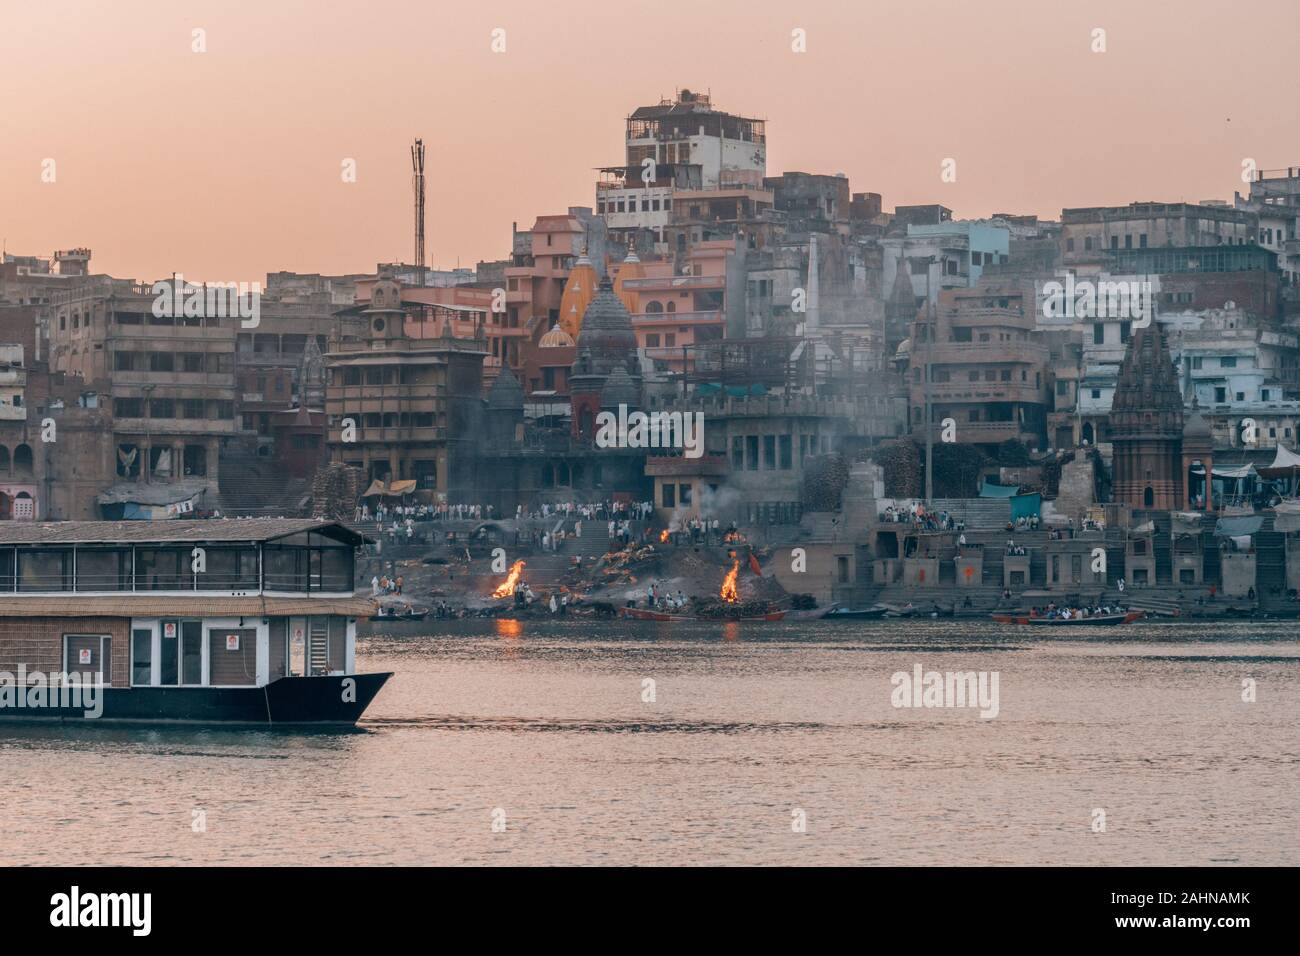 Cityscape of the holy city of Varanasi, India with the famous Ghats in front of the Ganga River Stock Photo